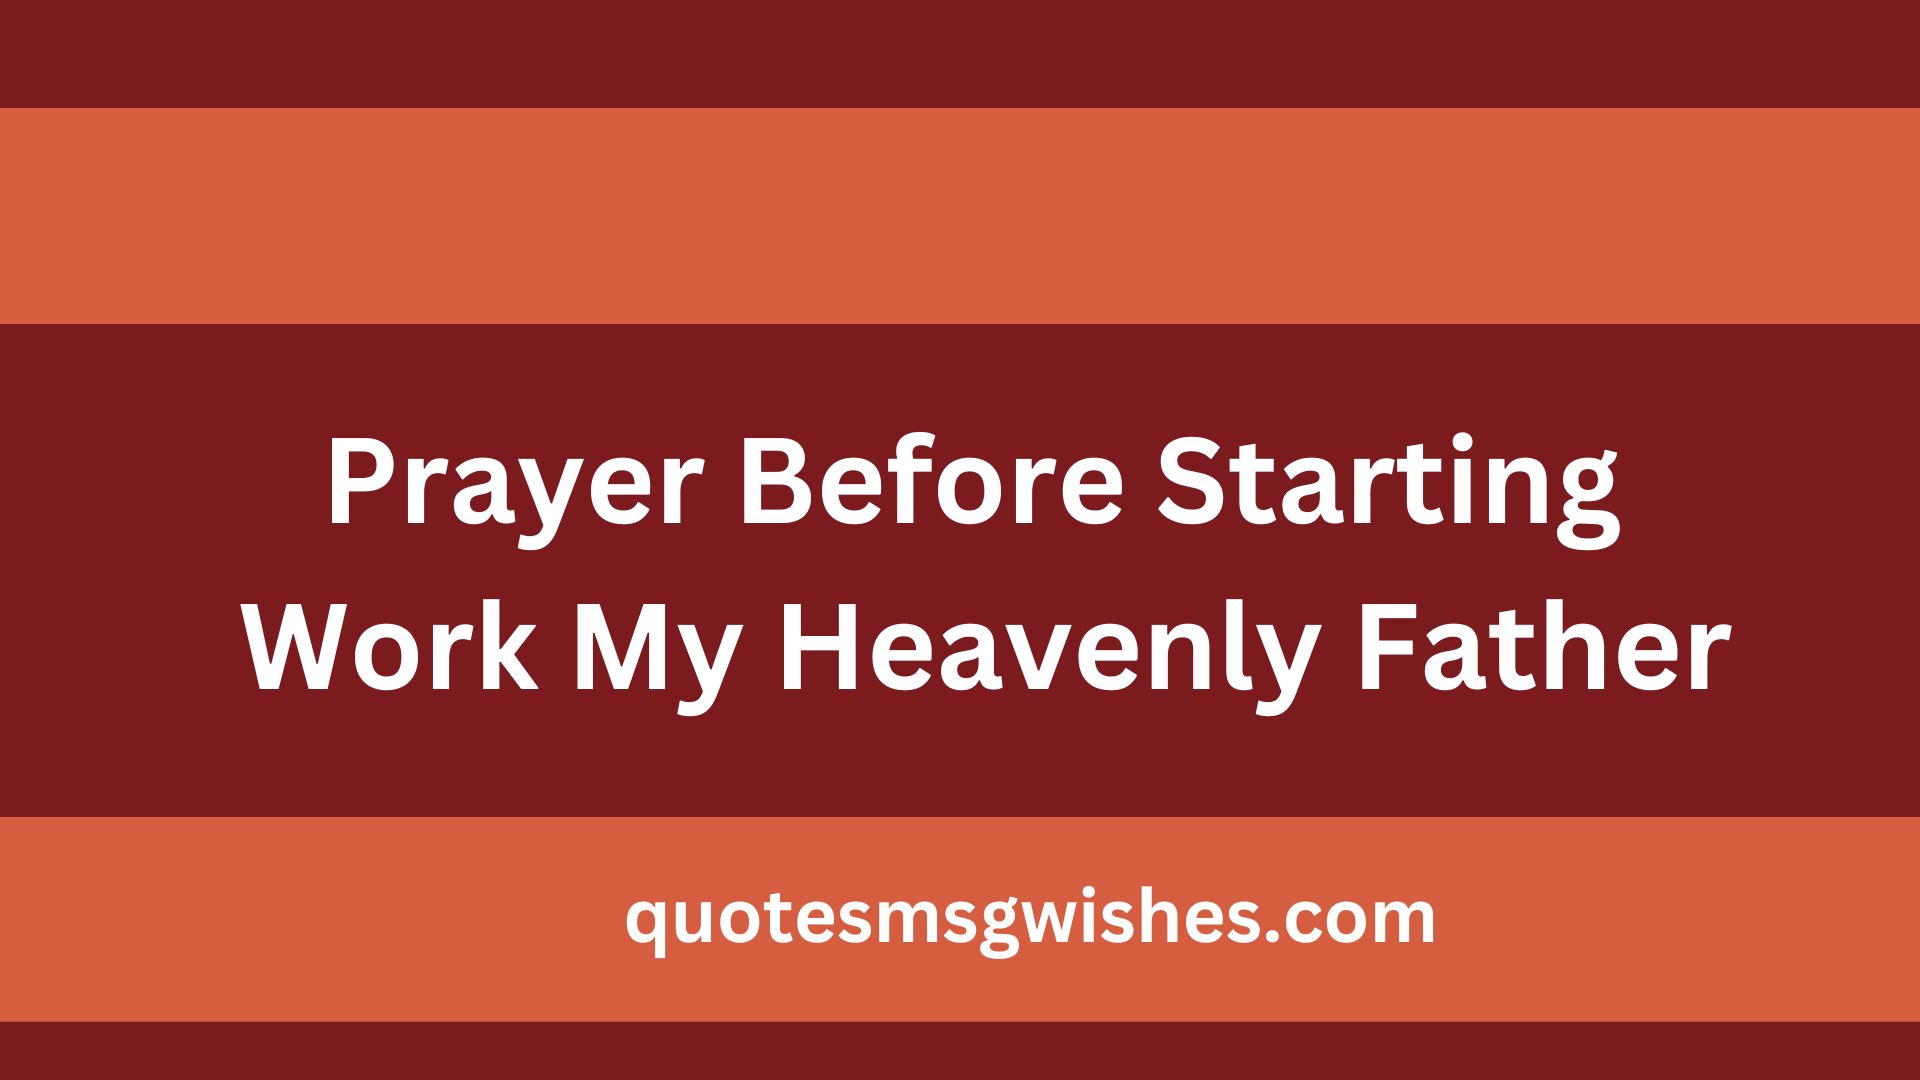 Prayer Before Starting Work My Heavenly Father